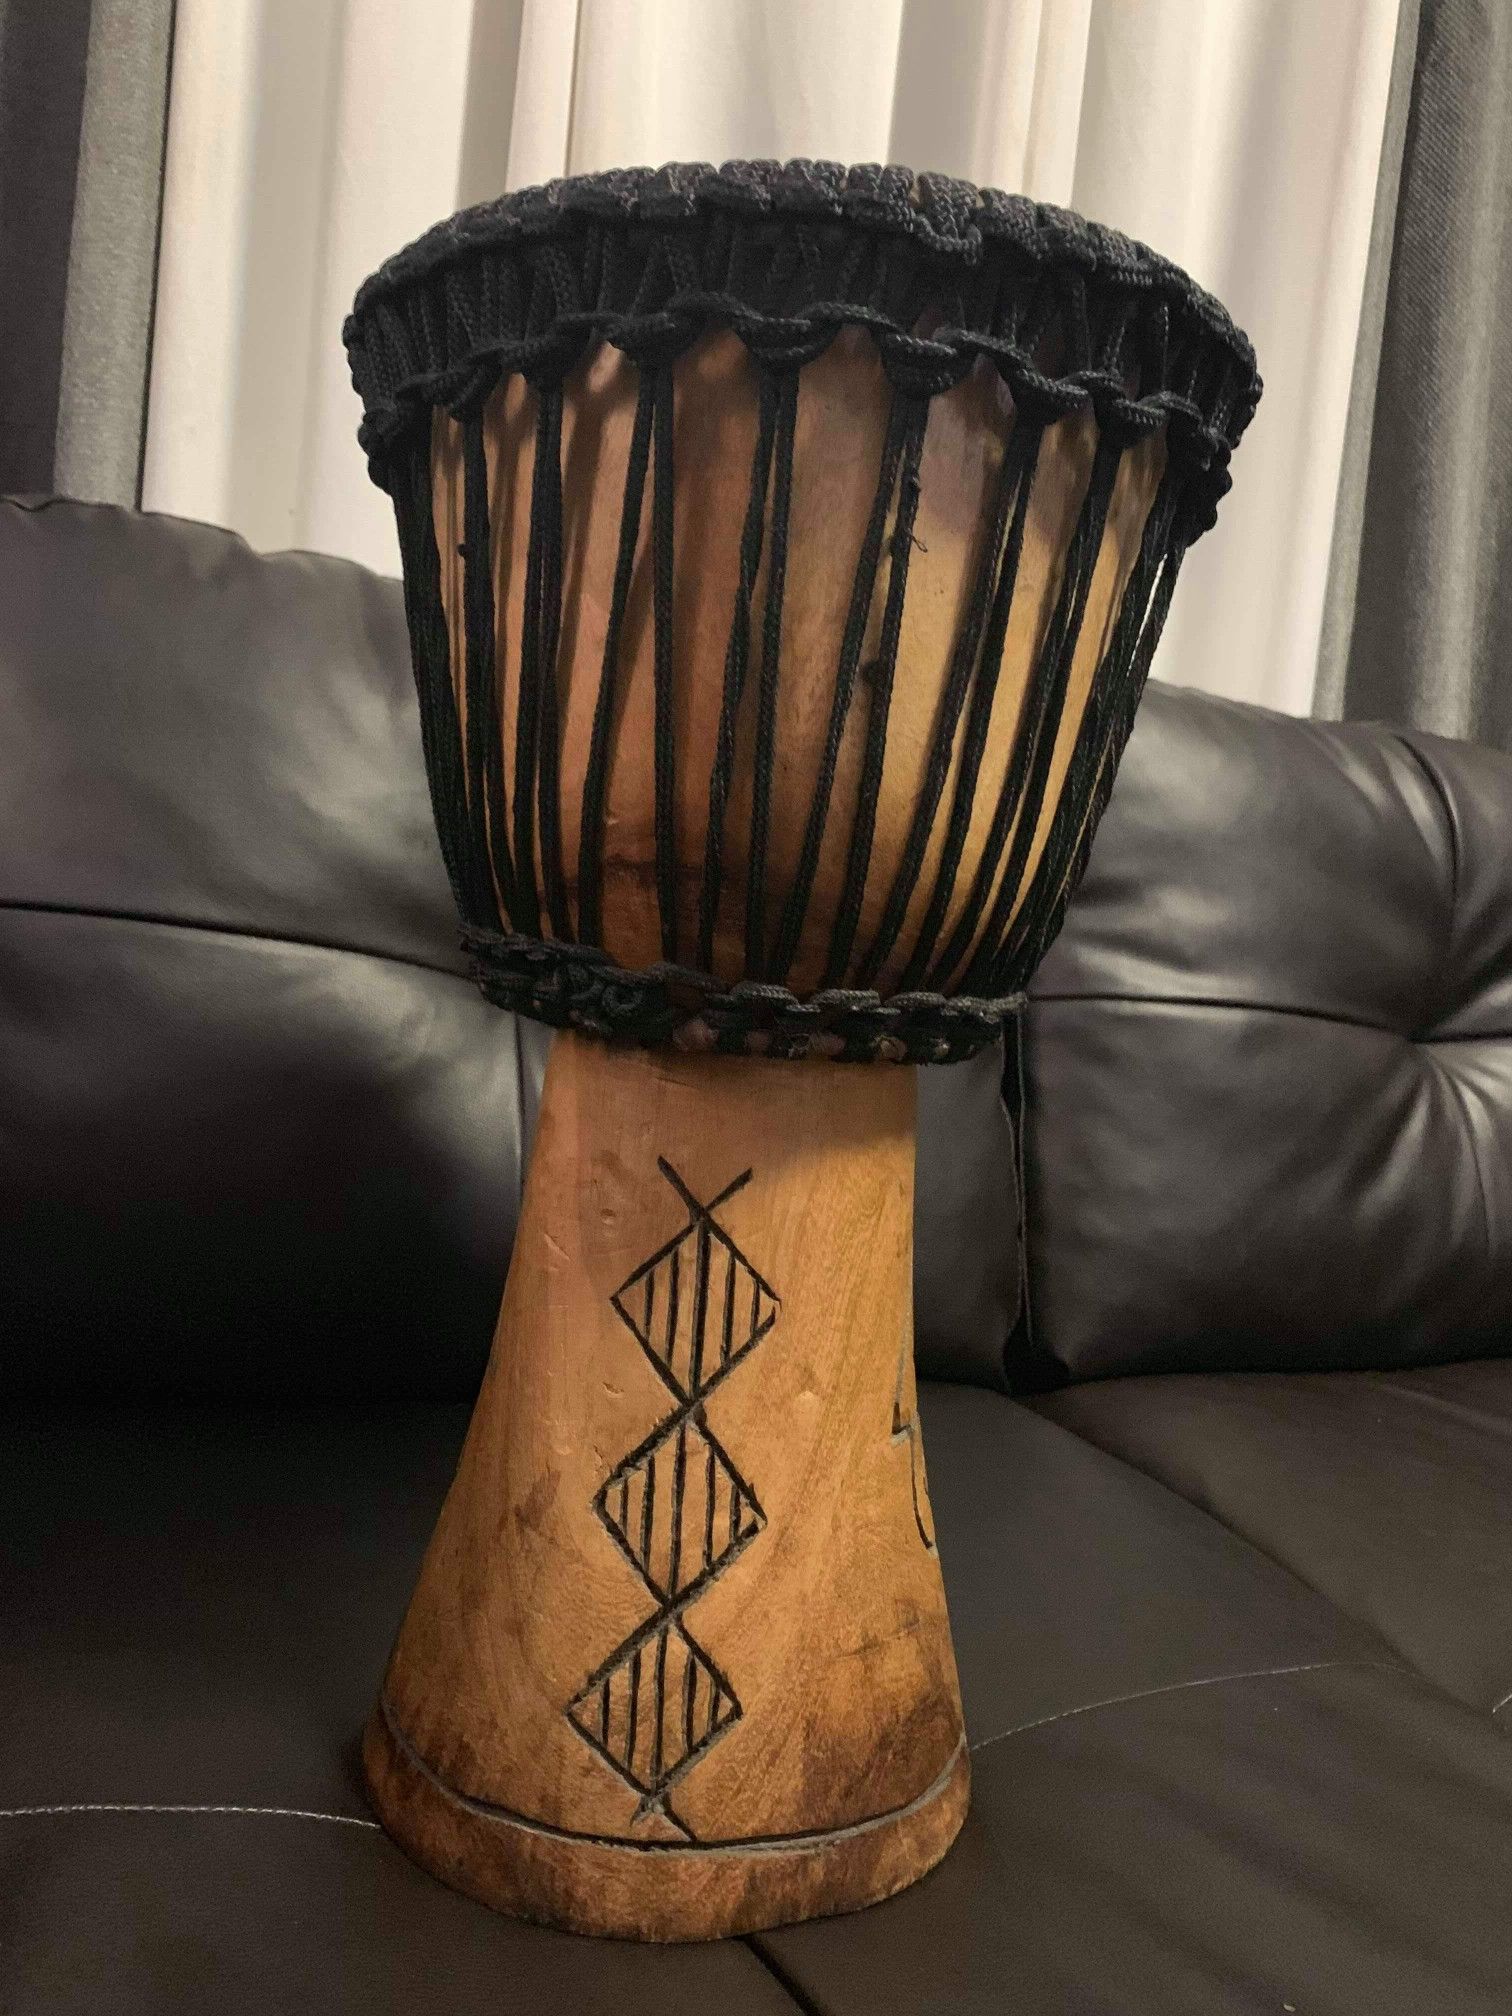 AFRICAN HAND MADE “BONGO” For SALE!!